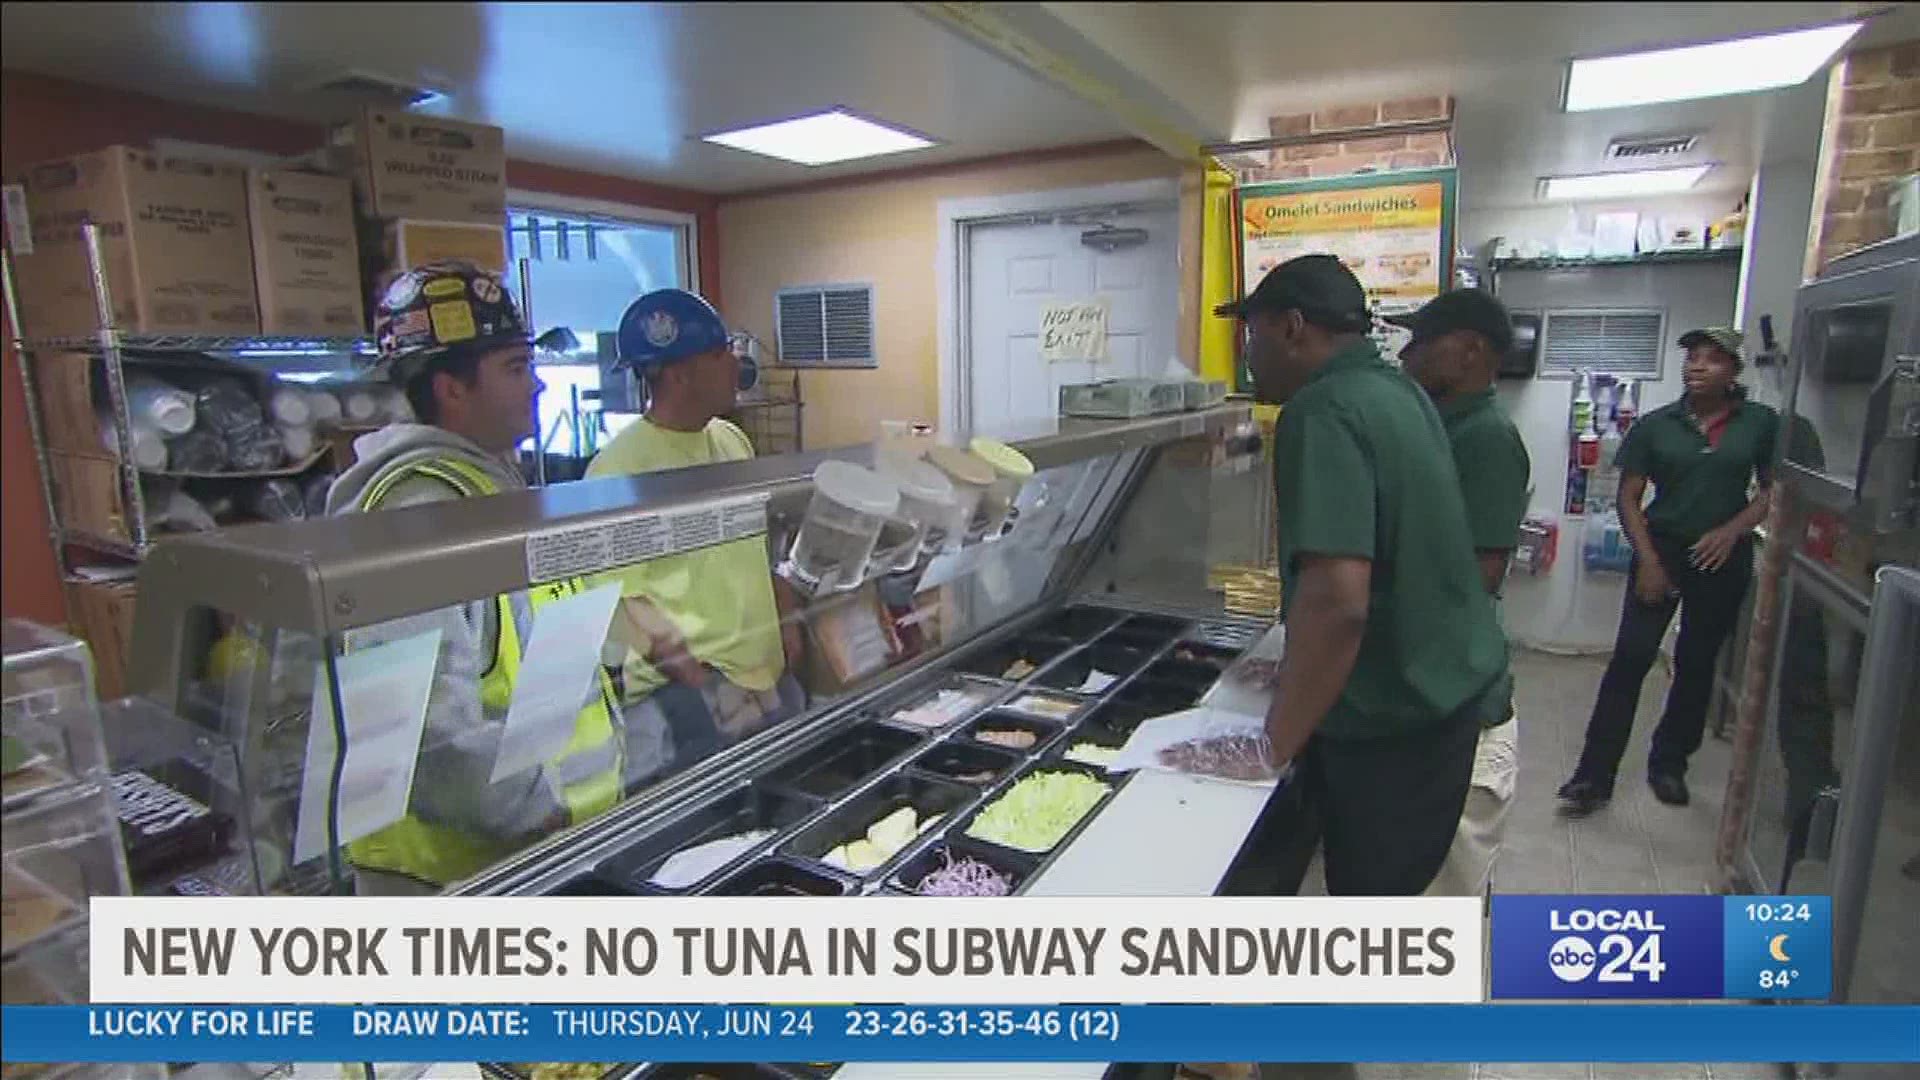 Local 24 News Anchor Richard Ransom discusses in his Ransom Note about the claims of if the tuna in Subway's tuna sandwich is real tuna.